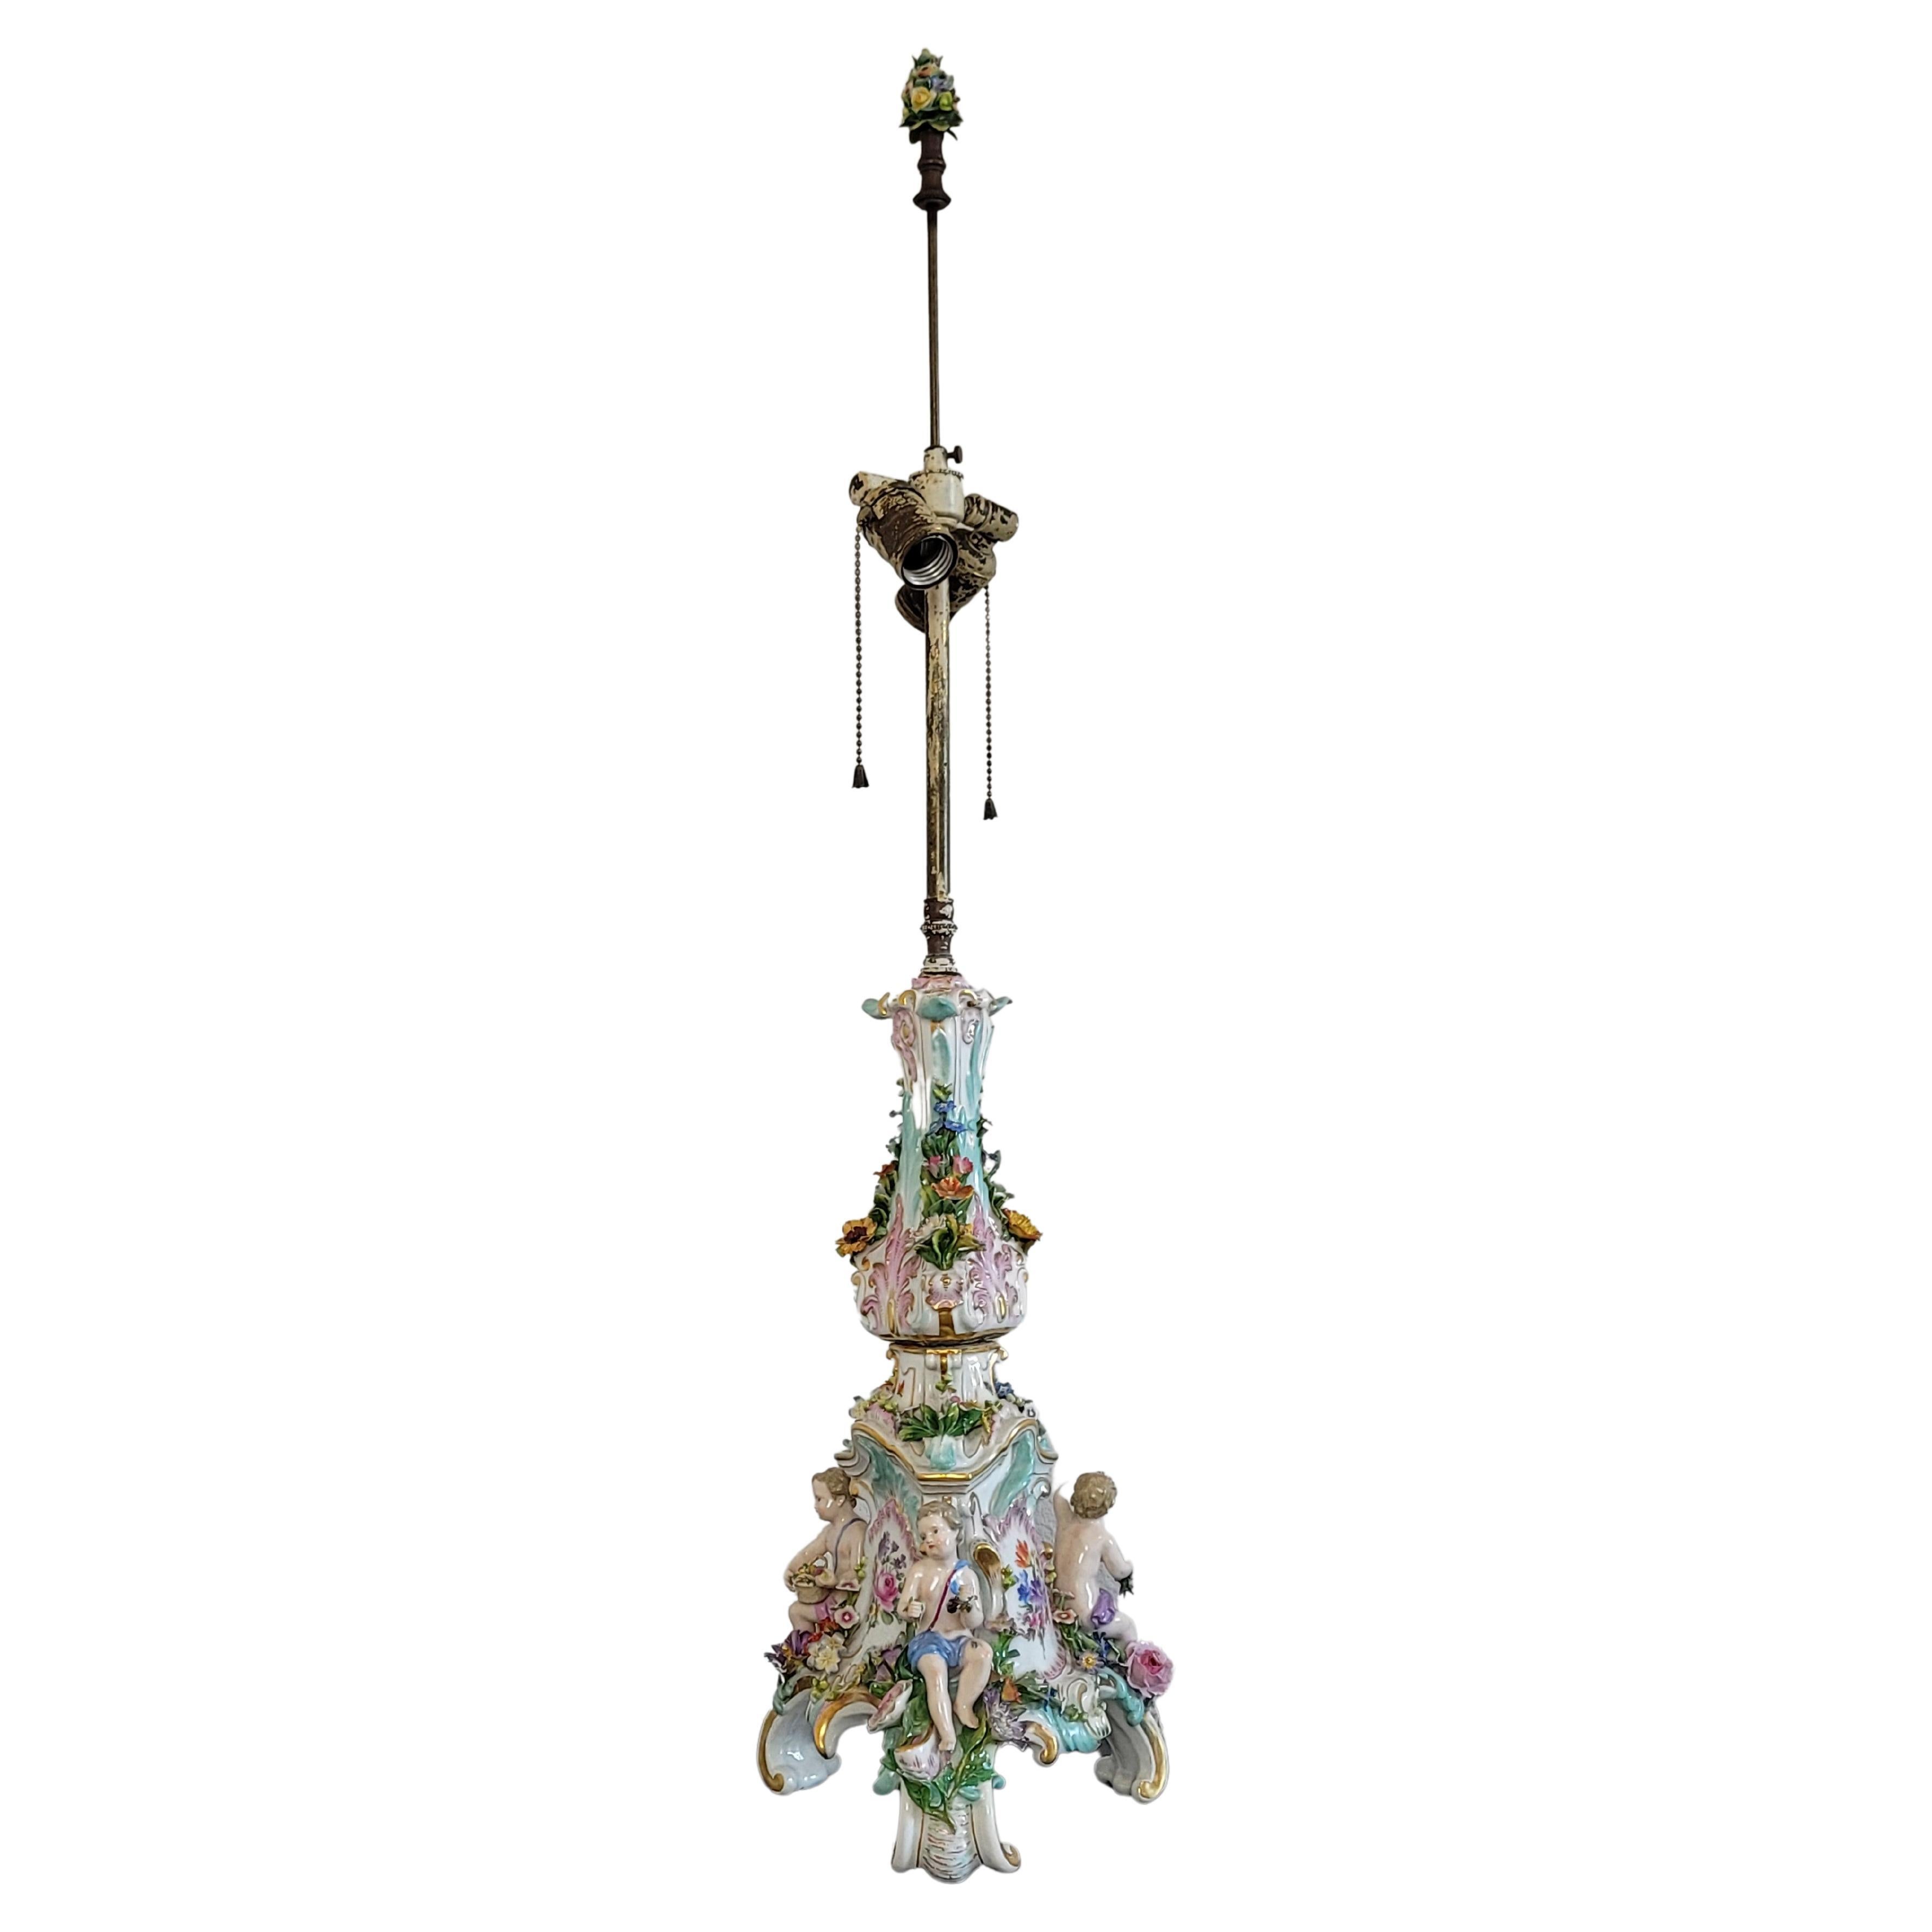 19th Century Meissen Porcelain Rococo Style Candlestick Table Lamp For Sale